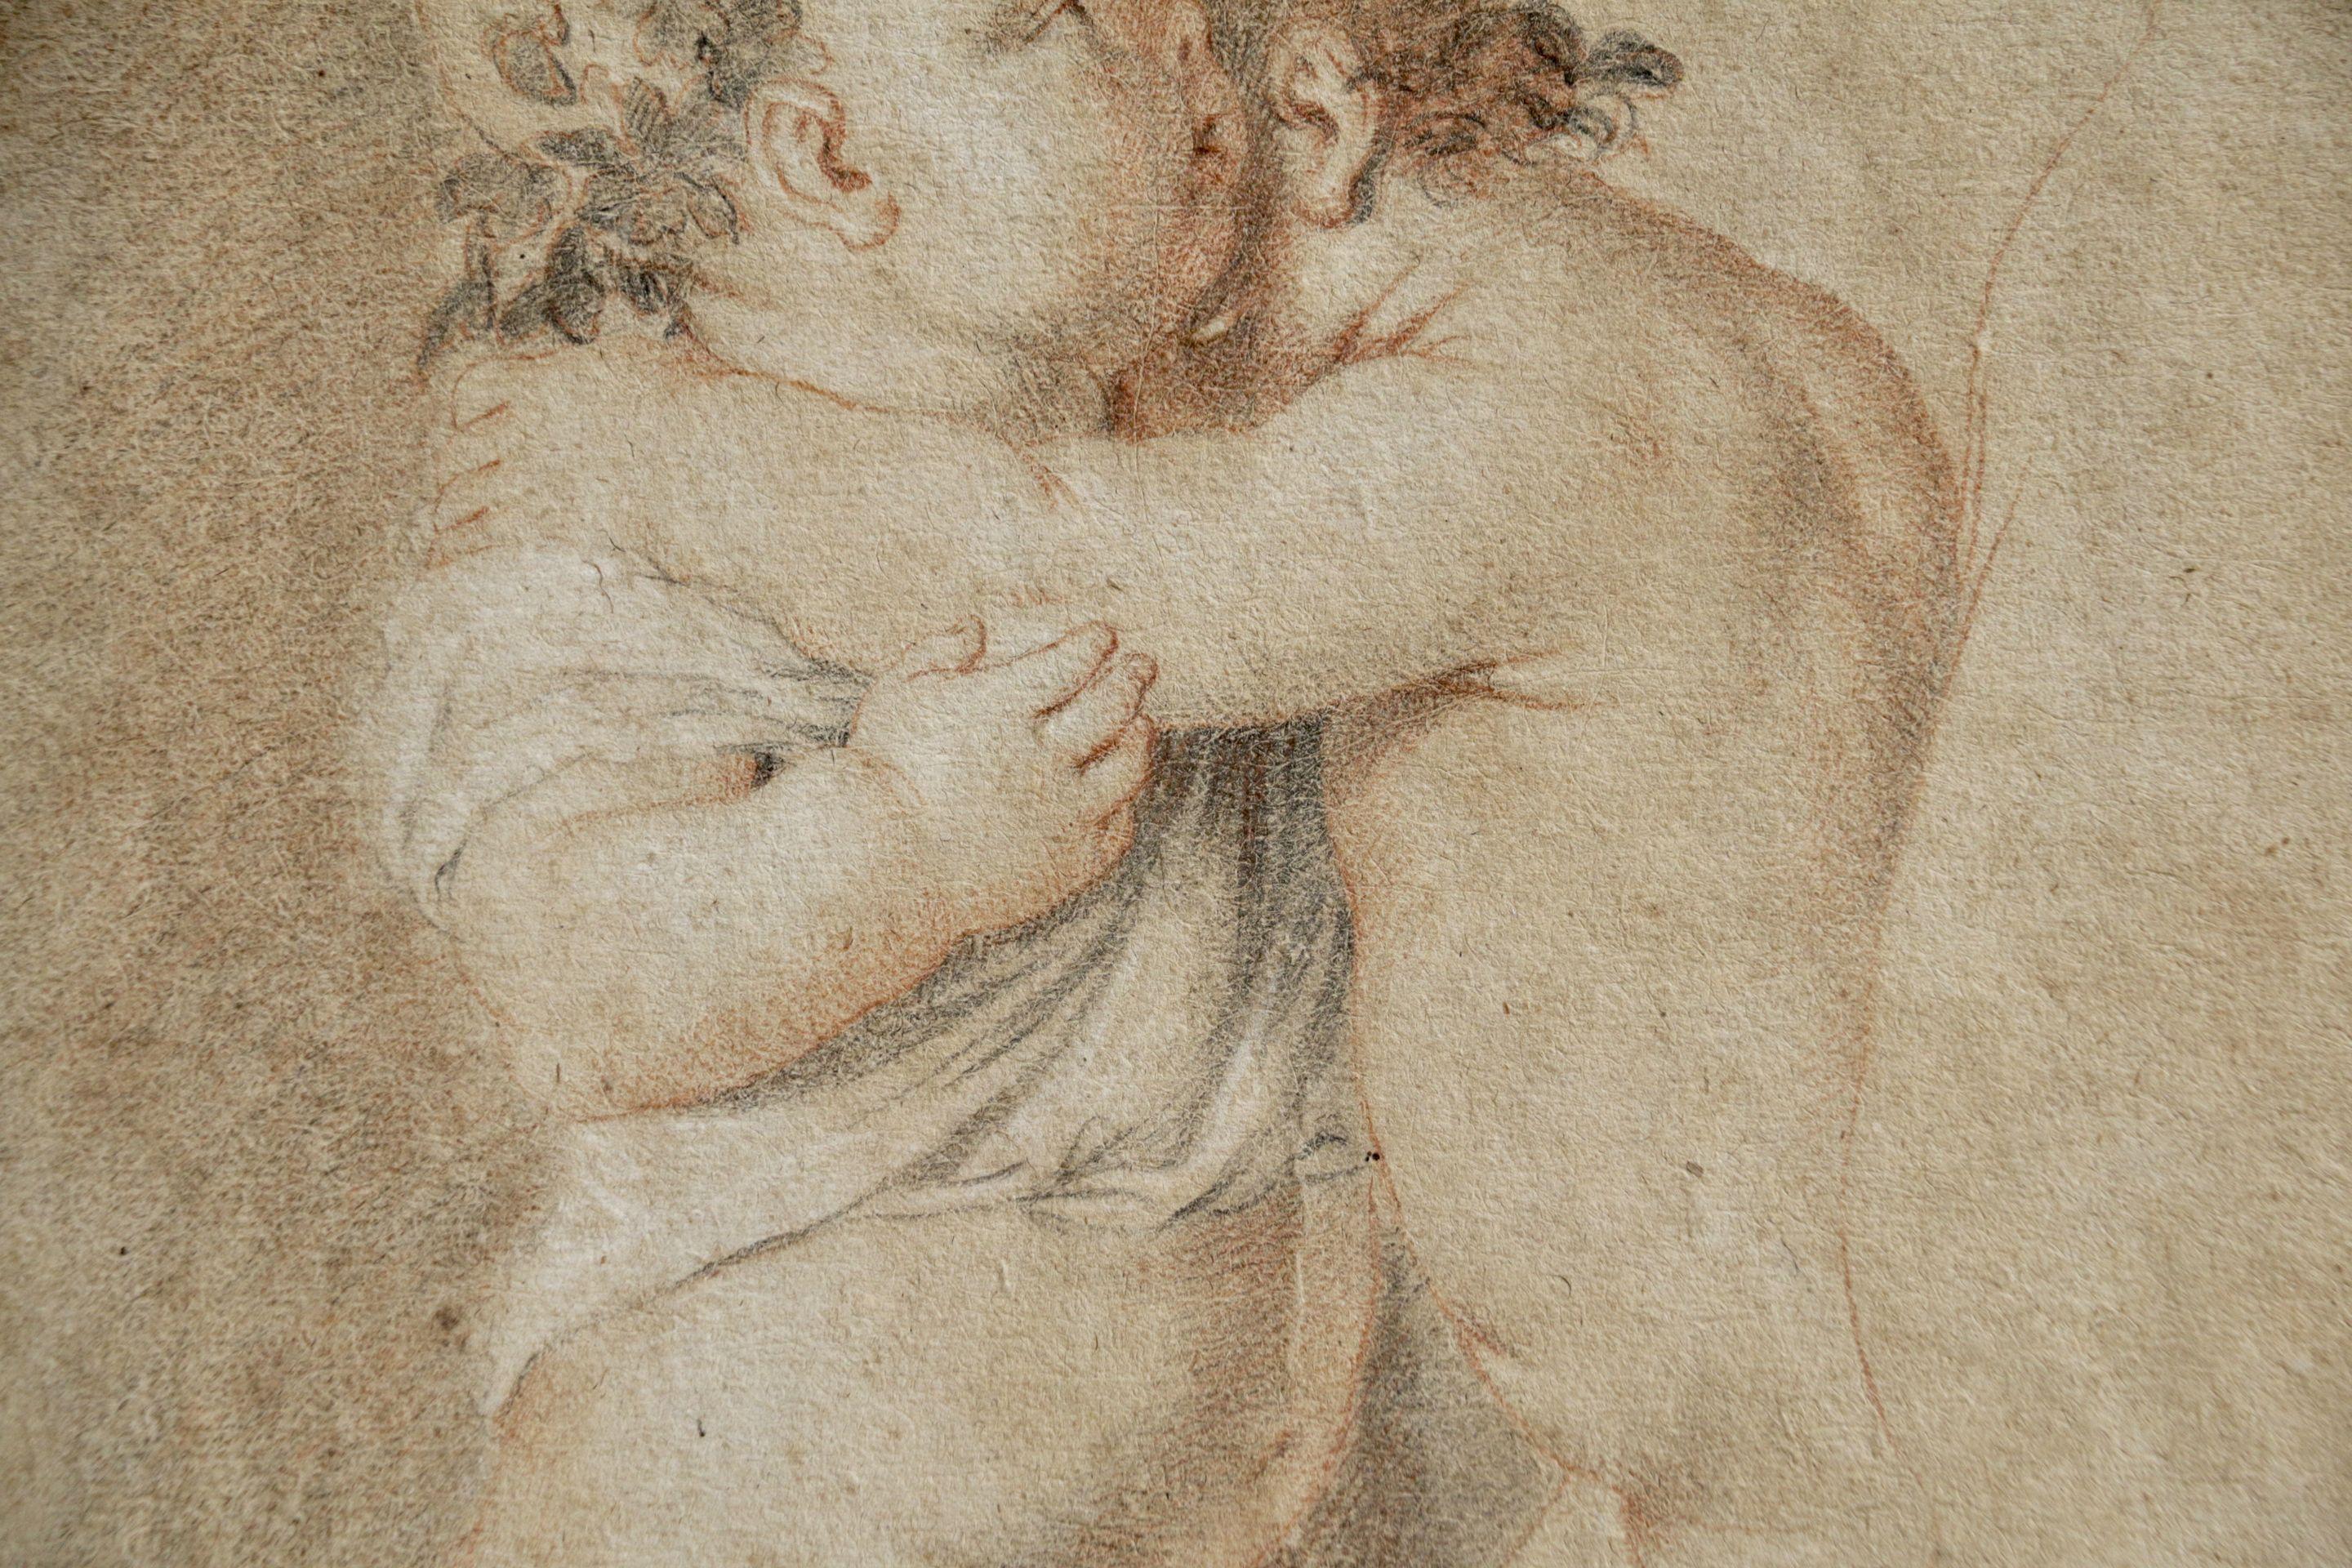 the holy infants embracing